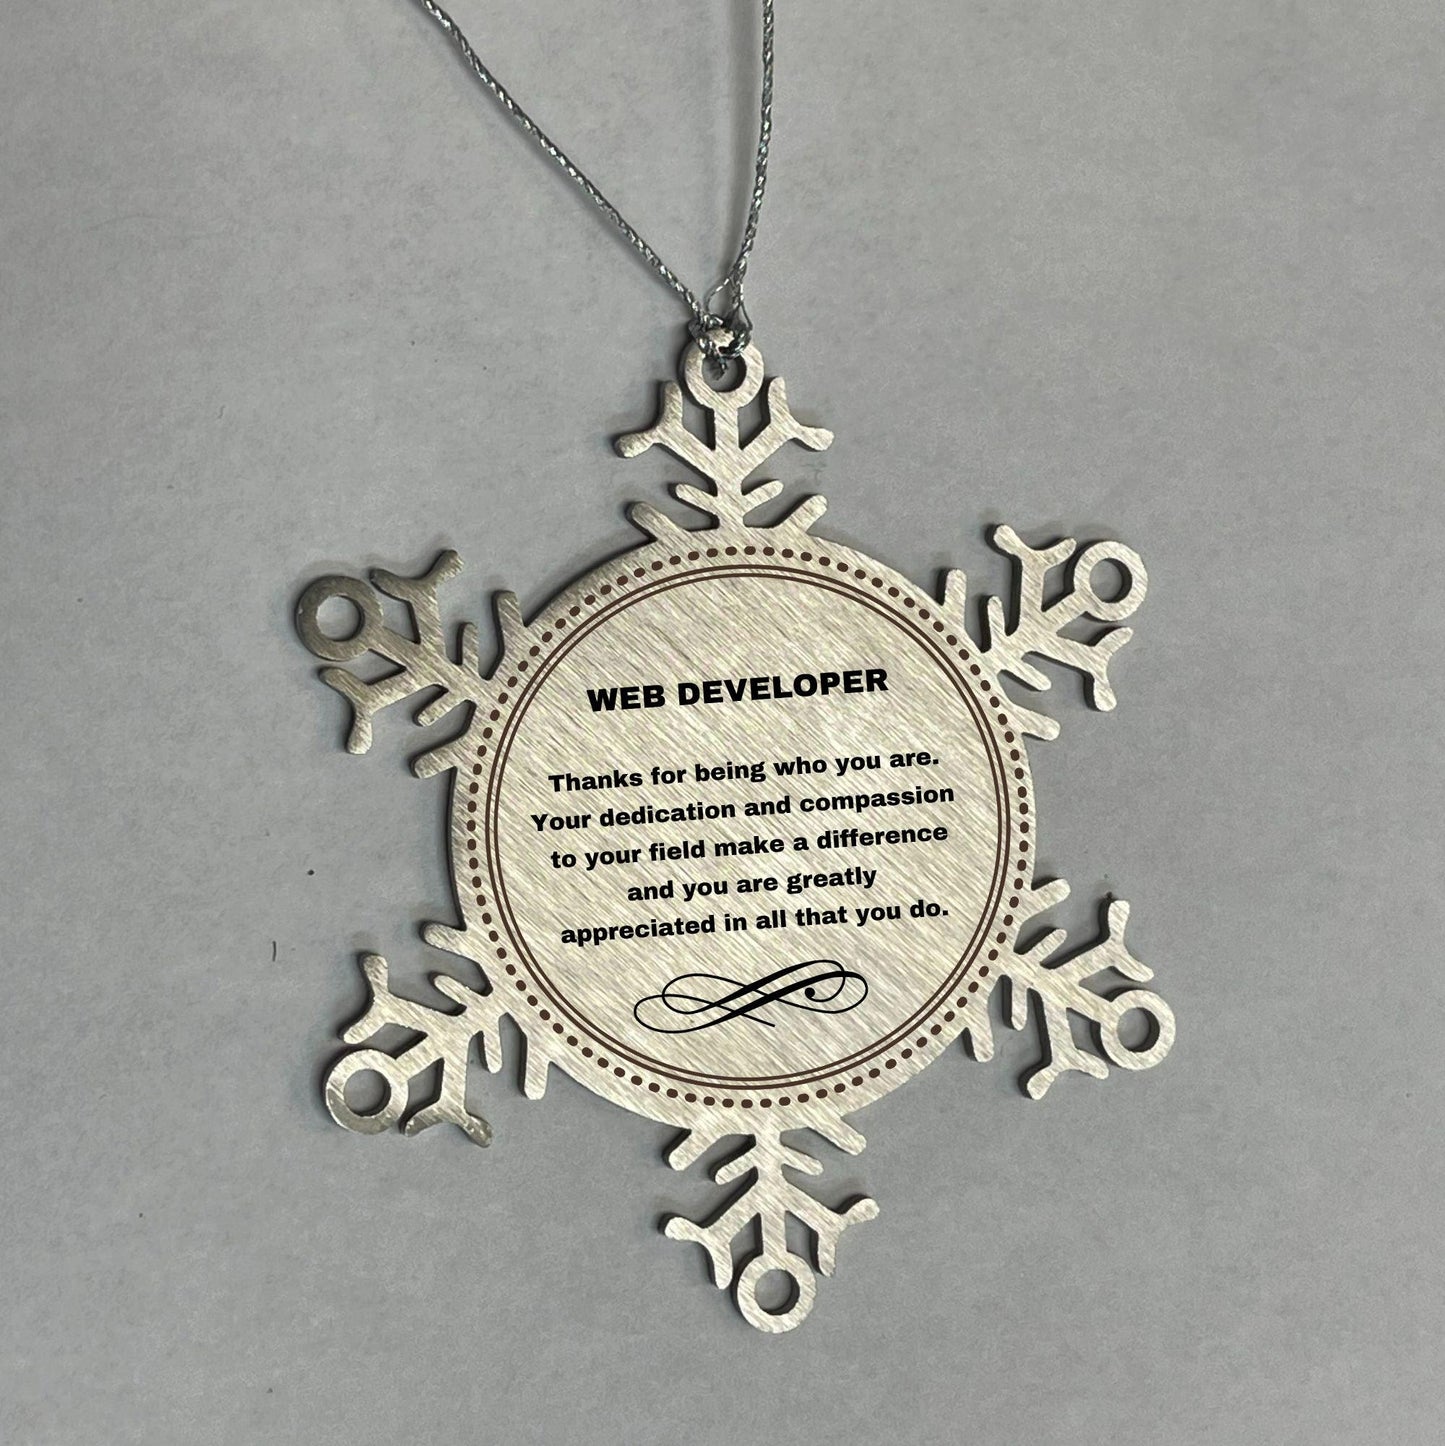 Web Developer Snowflake Ornament - Thanks for being who you are - Birthday Christmas Jewelry Gifts Coworkers Colleague Boss - Mallard Moon Gift Shop